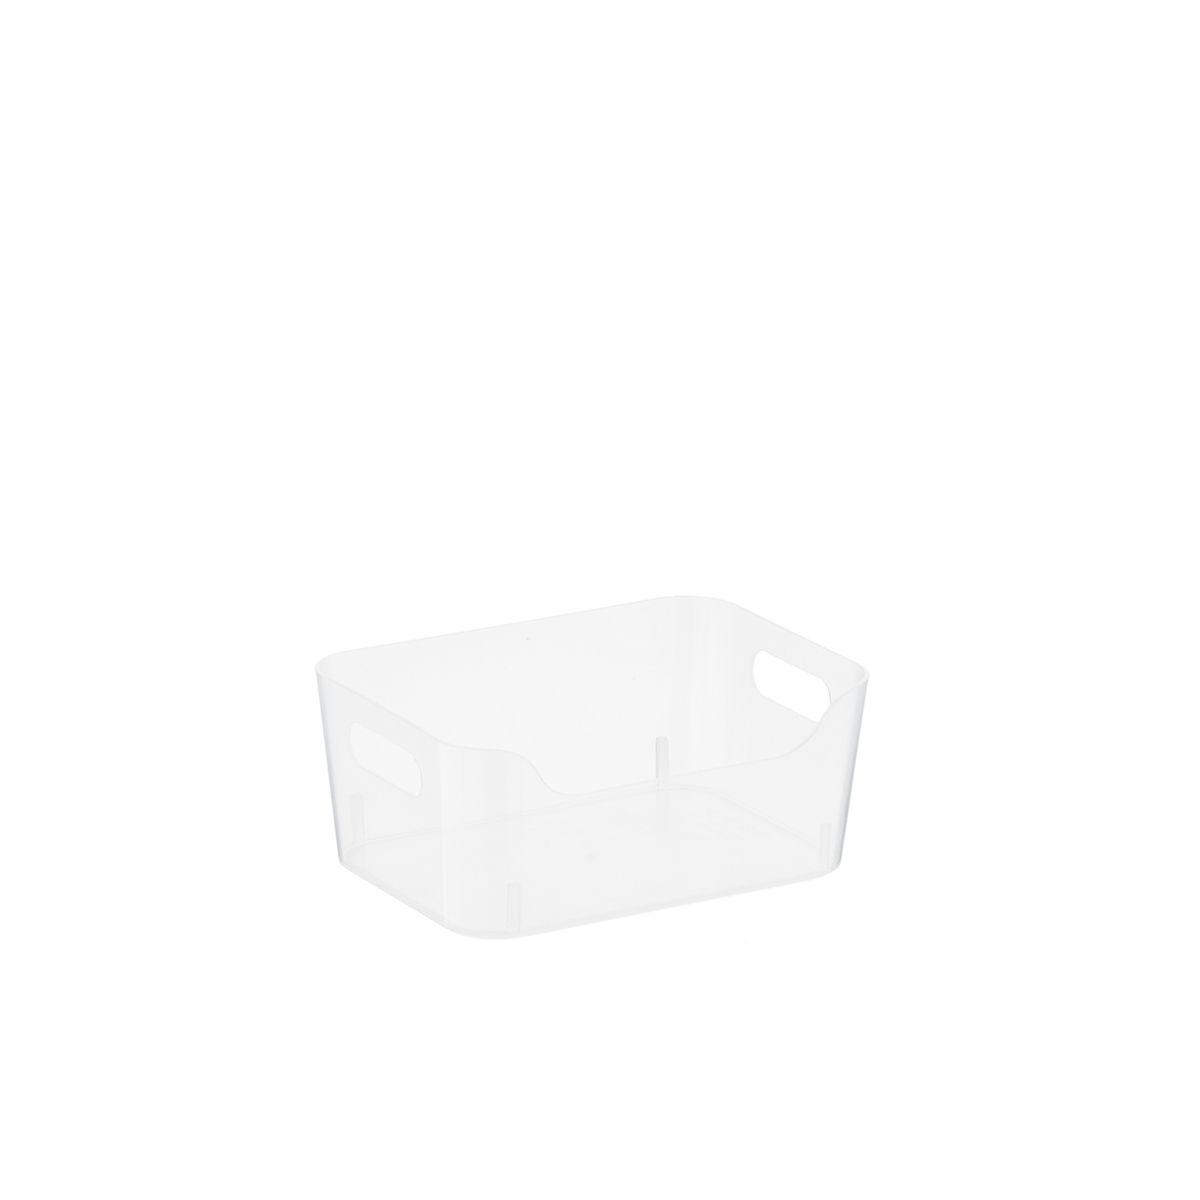 Plastic Storage Bin w/ Handles | The Container Store